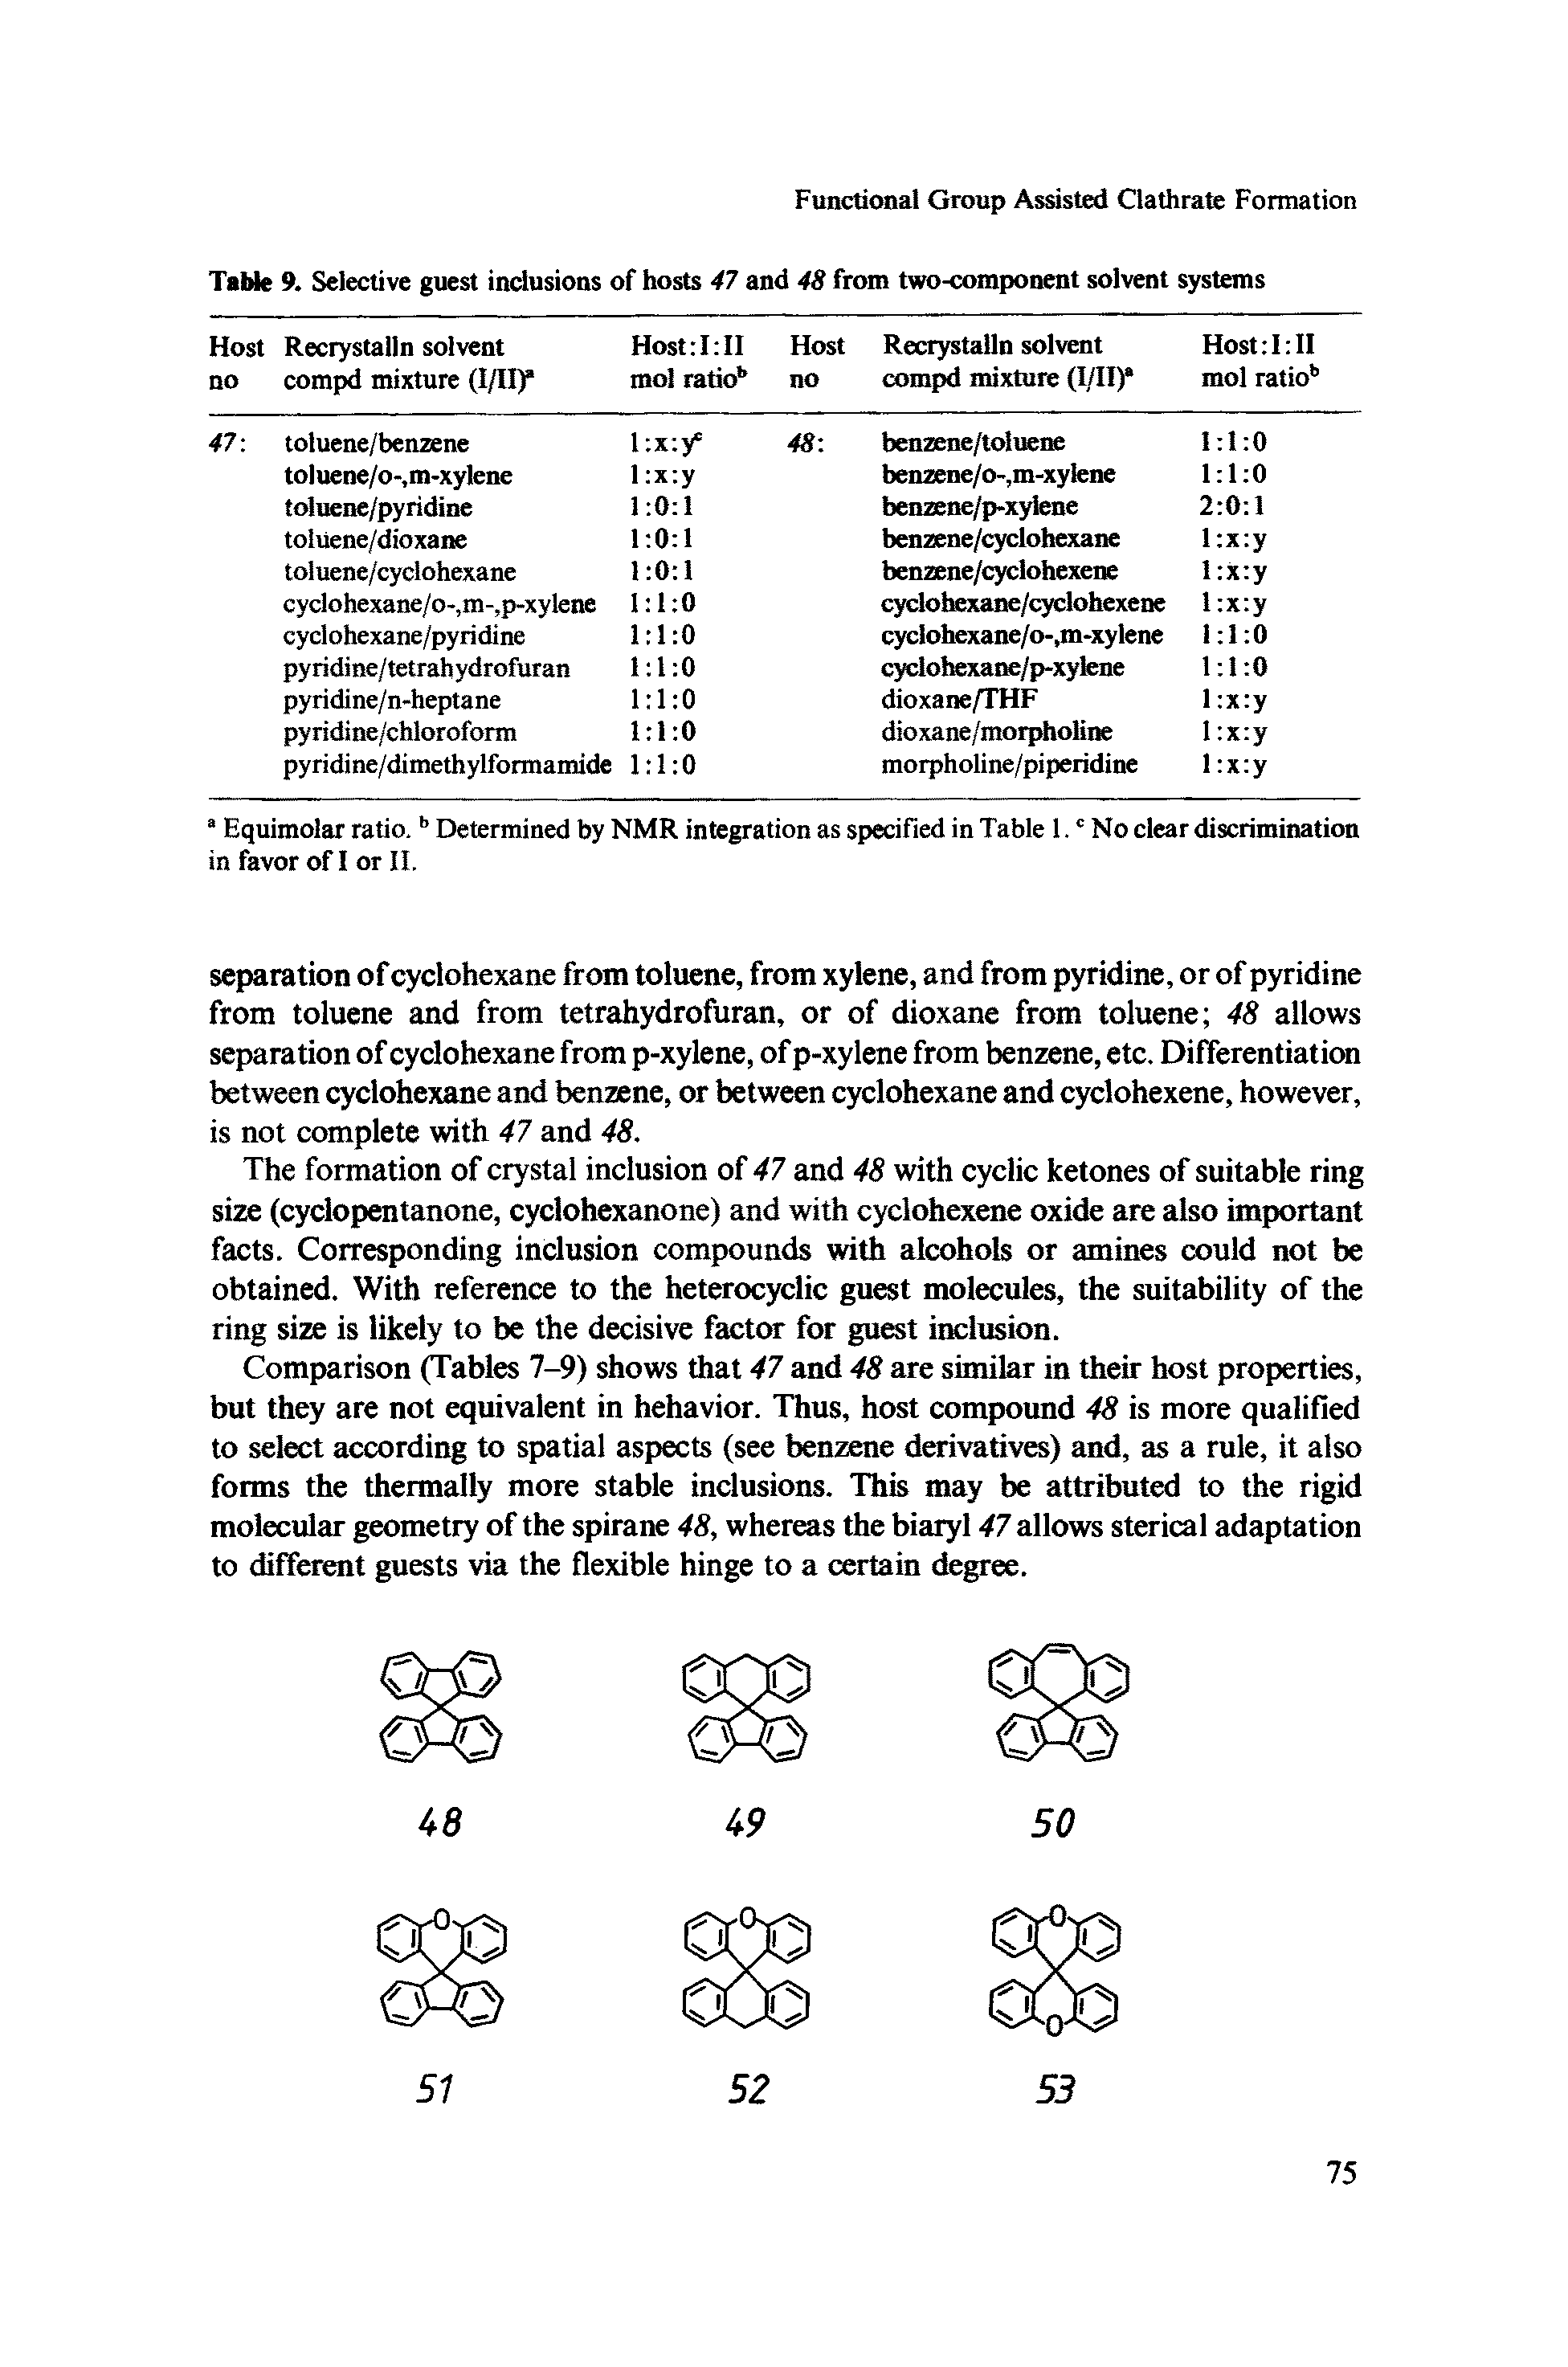 Table 9. Selective guest inclusions of hosts 47 and 48 from two-component solvent systems...